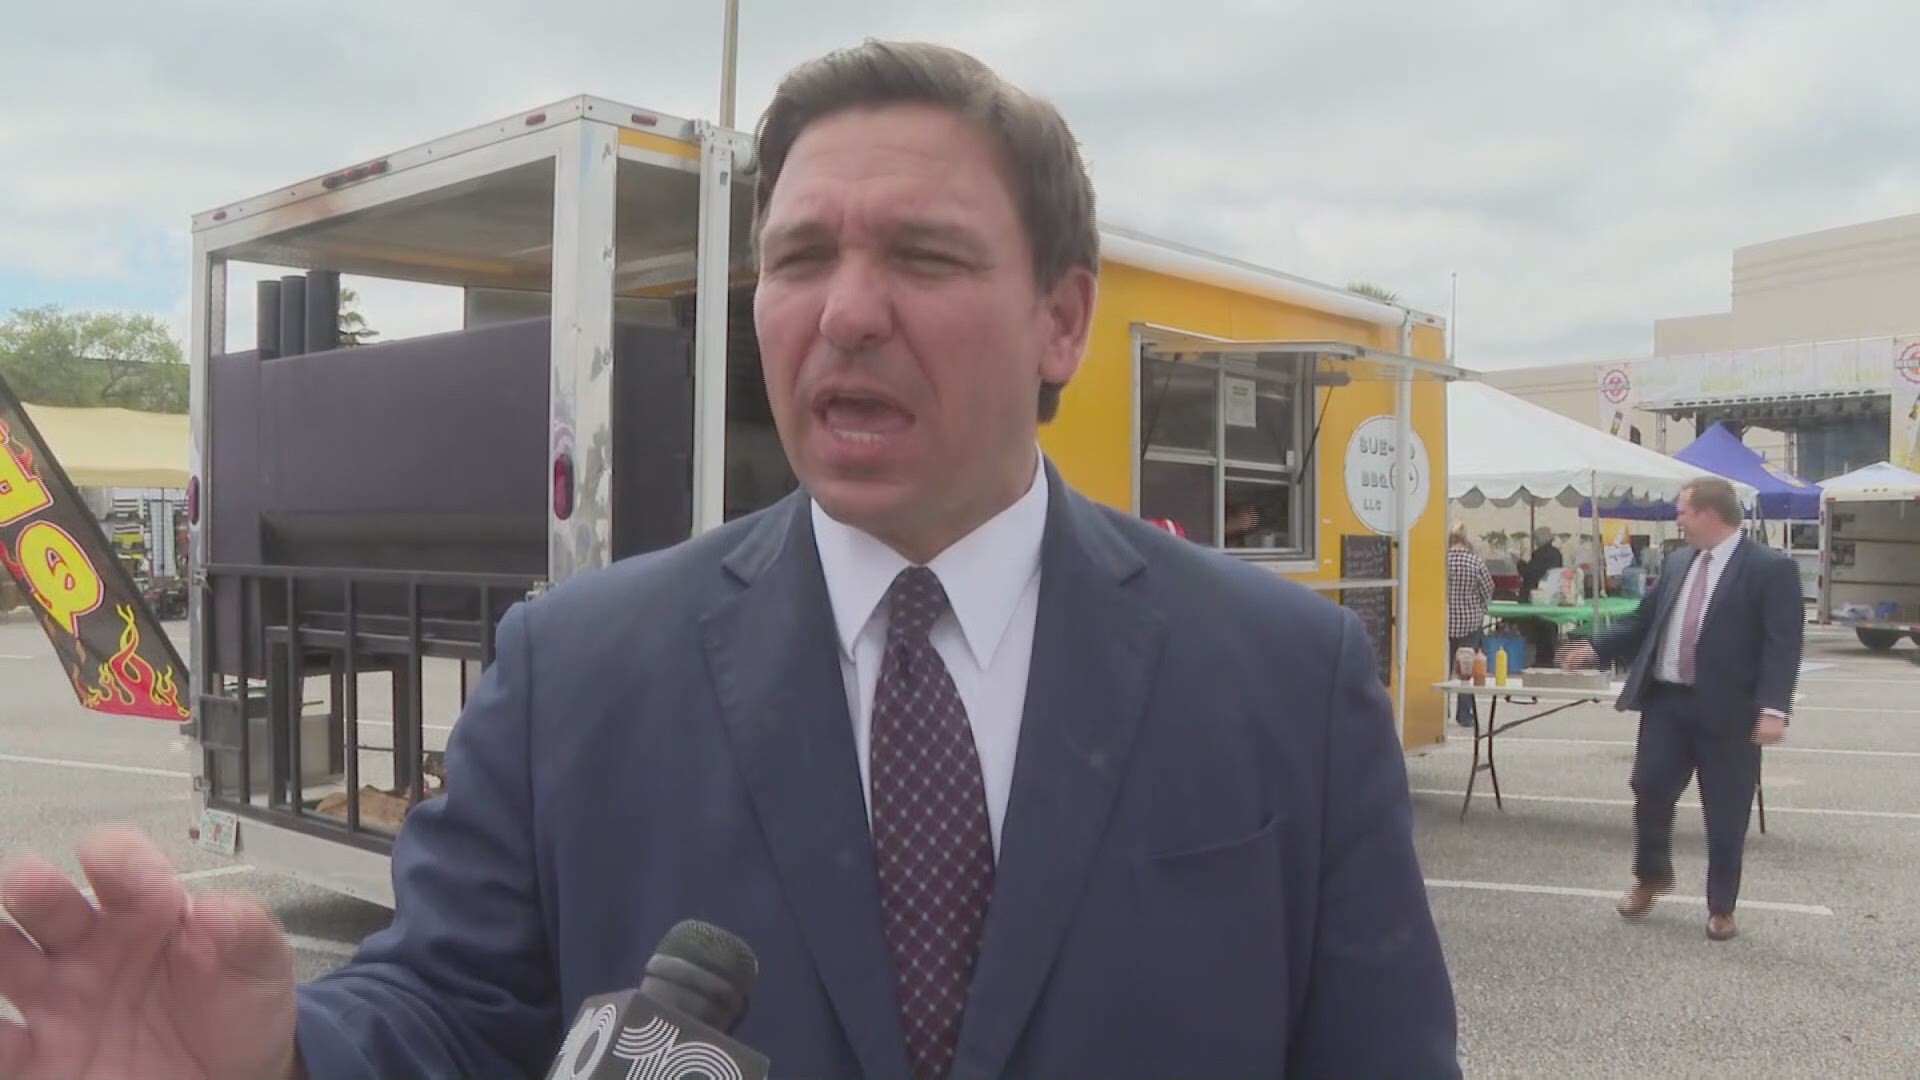 Governor DeSantis told 10 Tampa Bay on Thursday that when it's his turn, he wants to take the Johnson & Johnson vaccine.